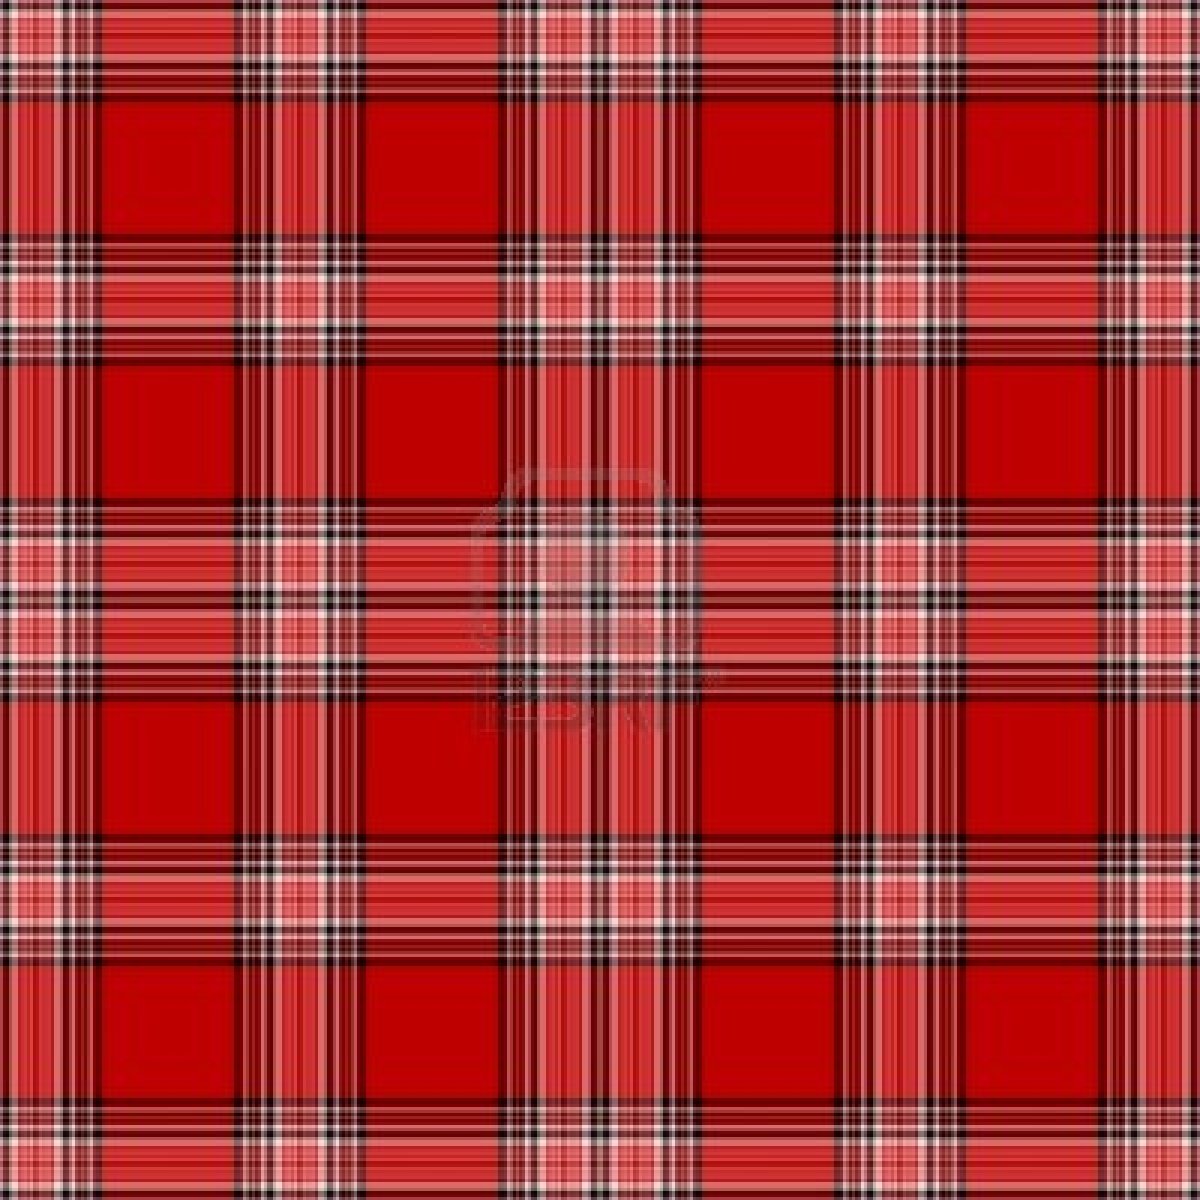 Displaying Image For Red And White Plaid Background